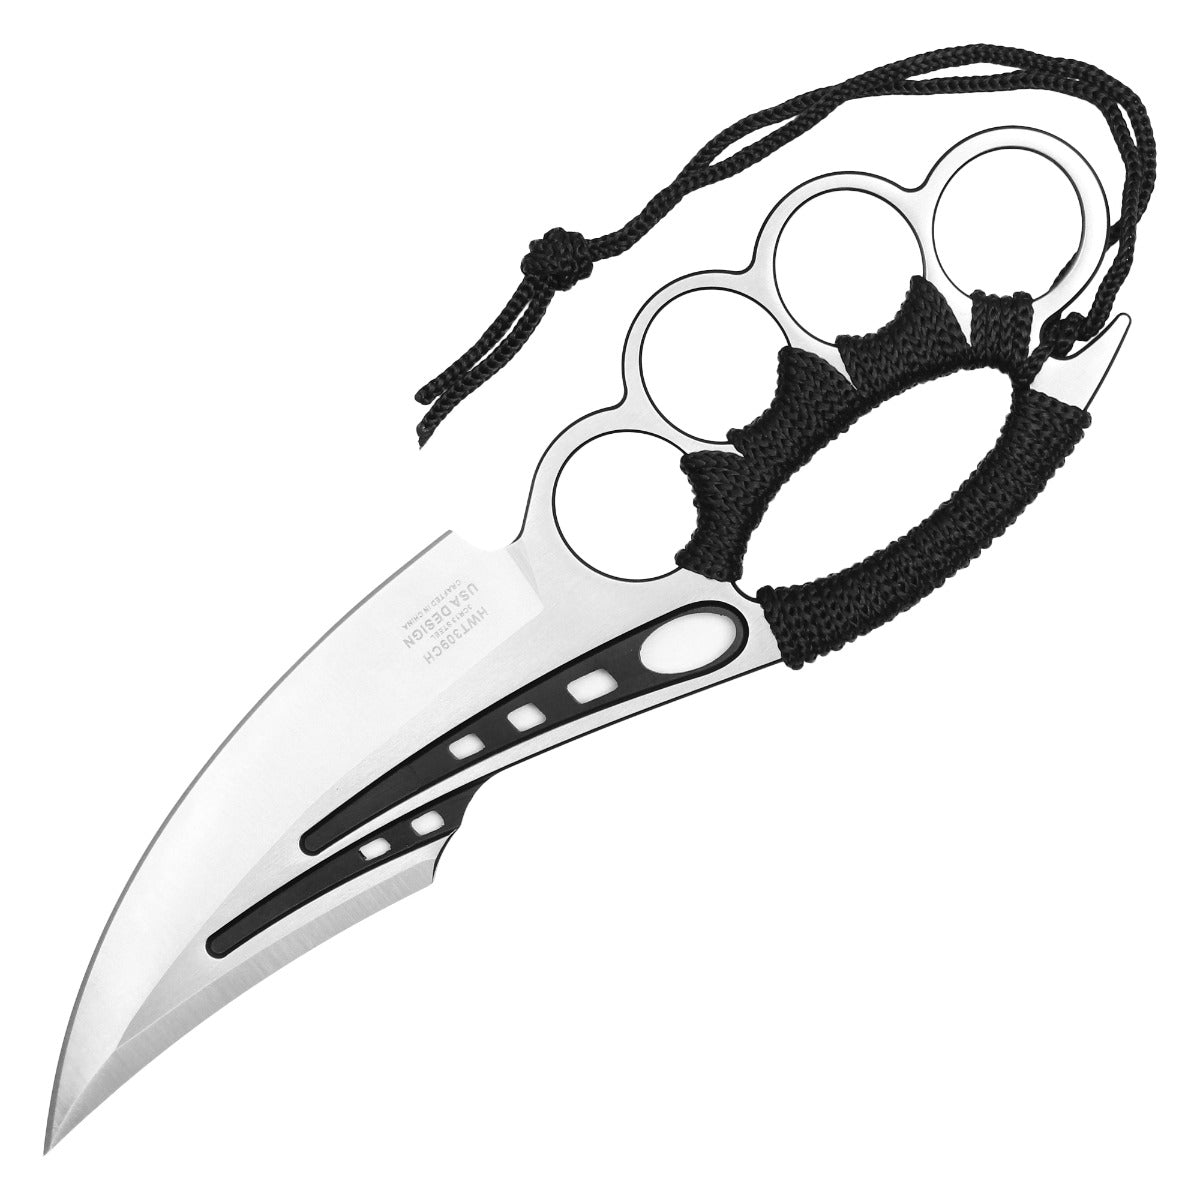 Wartech 10" Chrome Wrapped Trench Knife